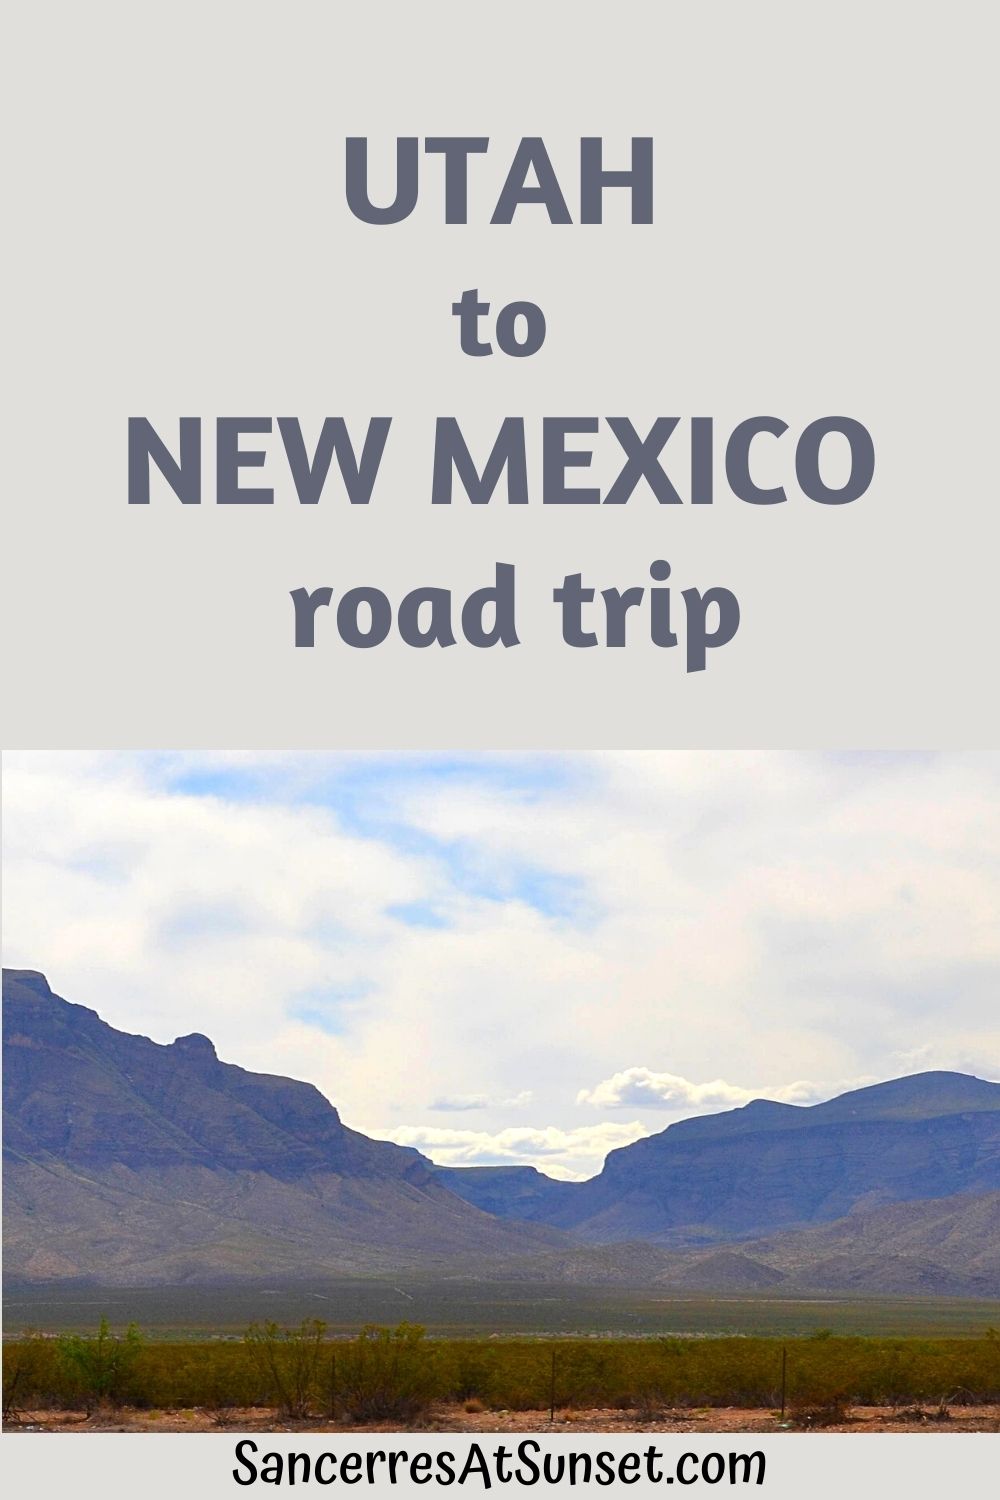 Utah to New Mexico -- part 3 of the great American road trip